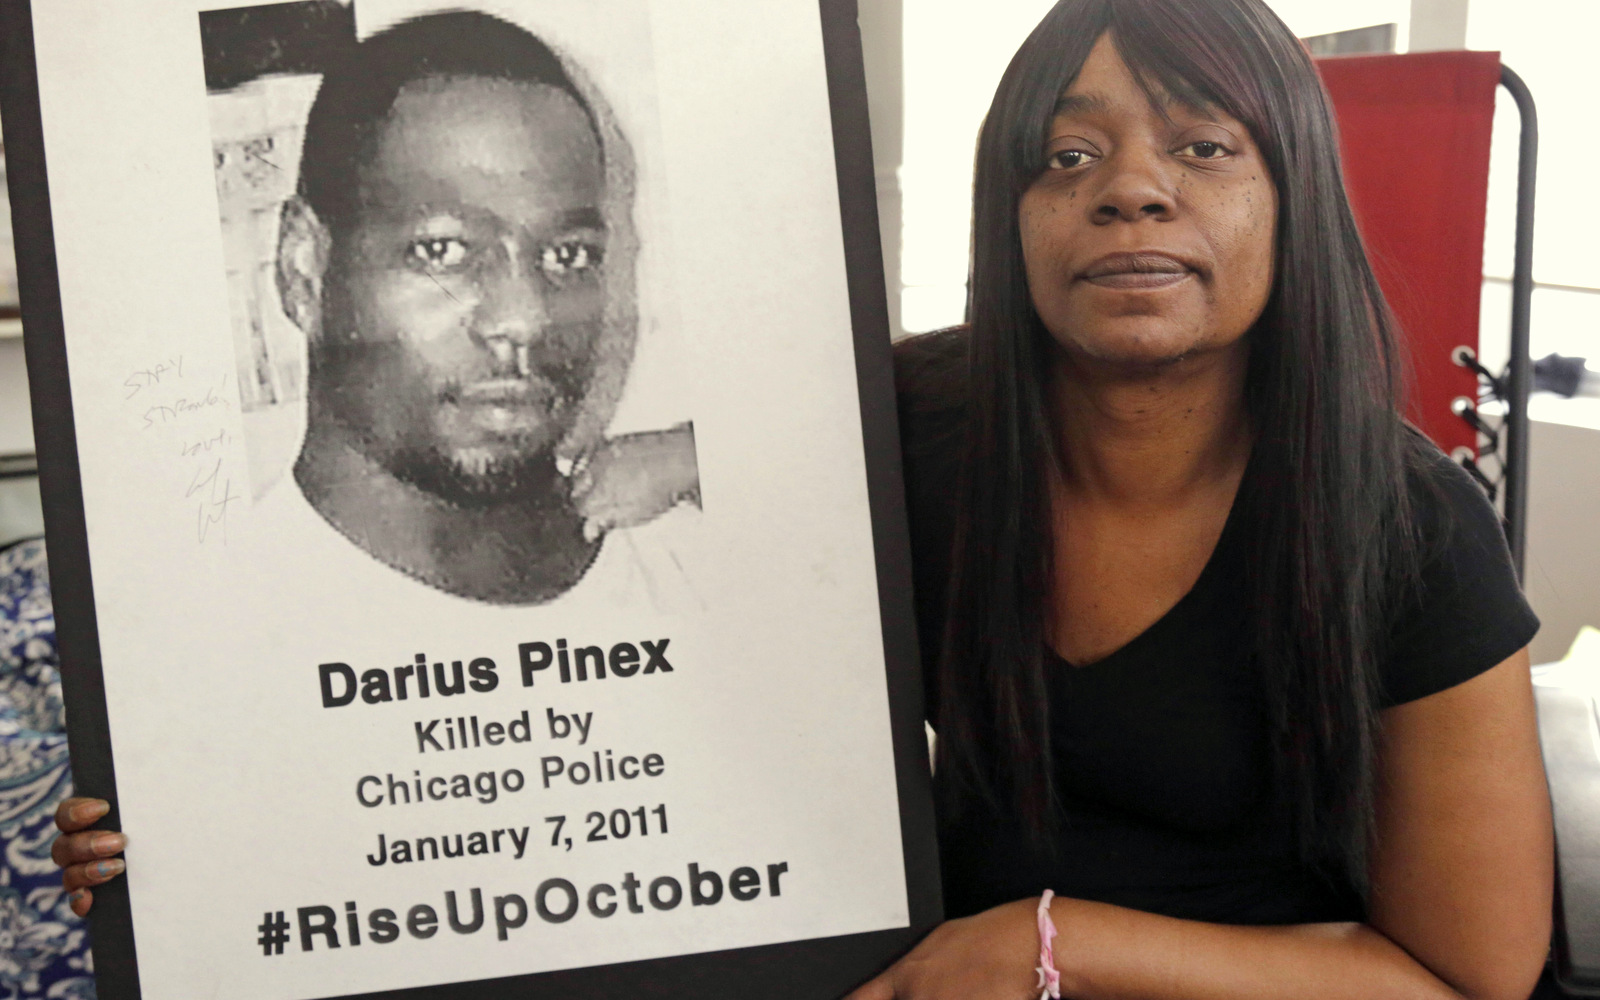 Gloria Pinex holds a photo of her son, Darius Pinex, at her home in Chicago. Pinex sued the city after her son was killed by police in 2011 and on Monday, Jan. 4, 2016, a judge accused a city prosecutor of lying, prompting the city's law department to examine dozens of other cases the attorney worked on. (AP Photo/M. Spencer Green)